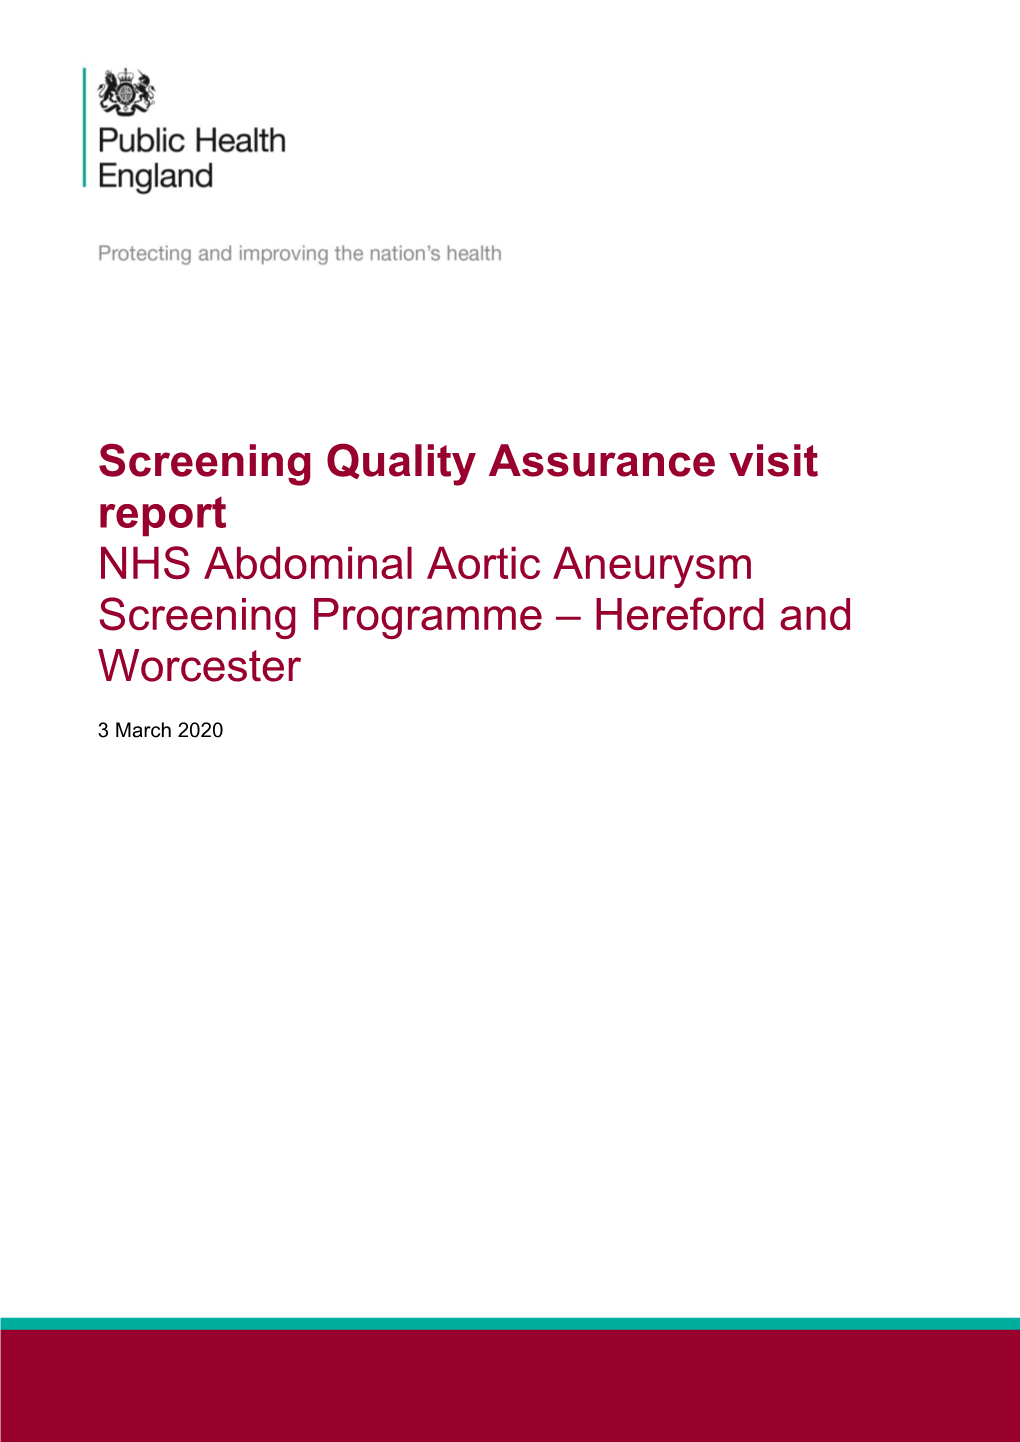 QA Report: NHS Abdominal Aortic Aneurysm Screening Programme – Hereford and Worcester